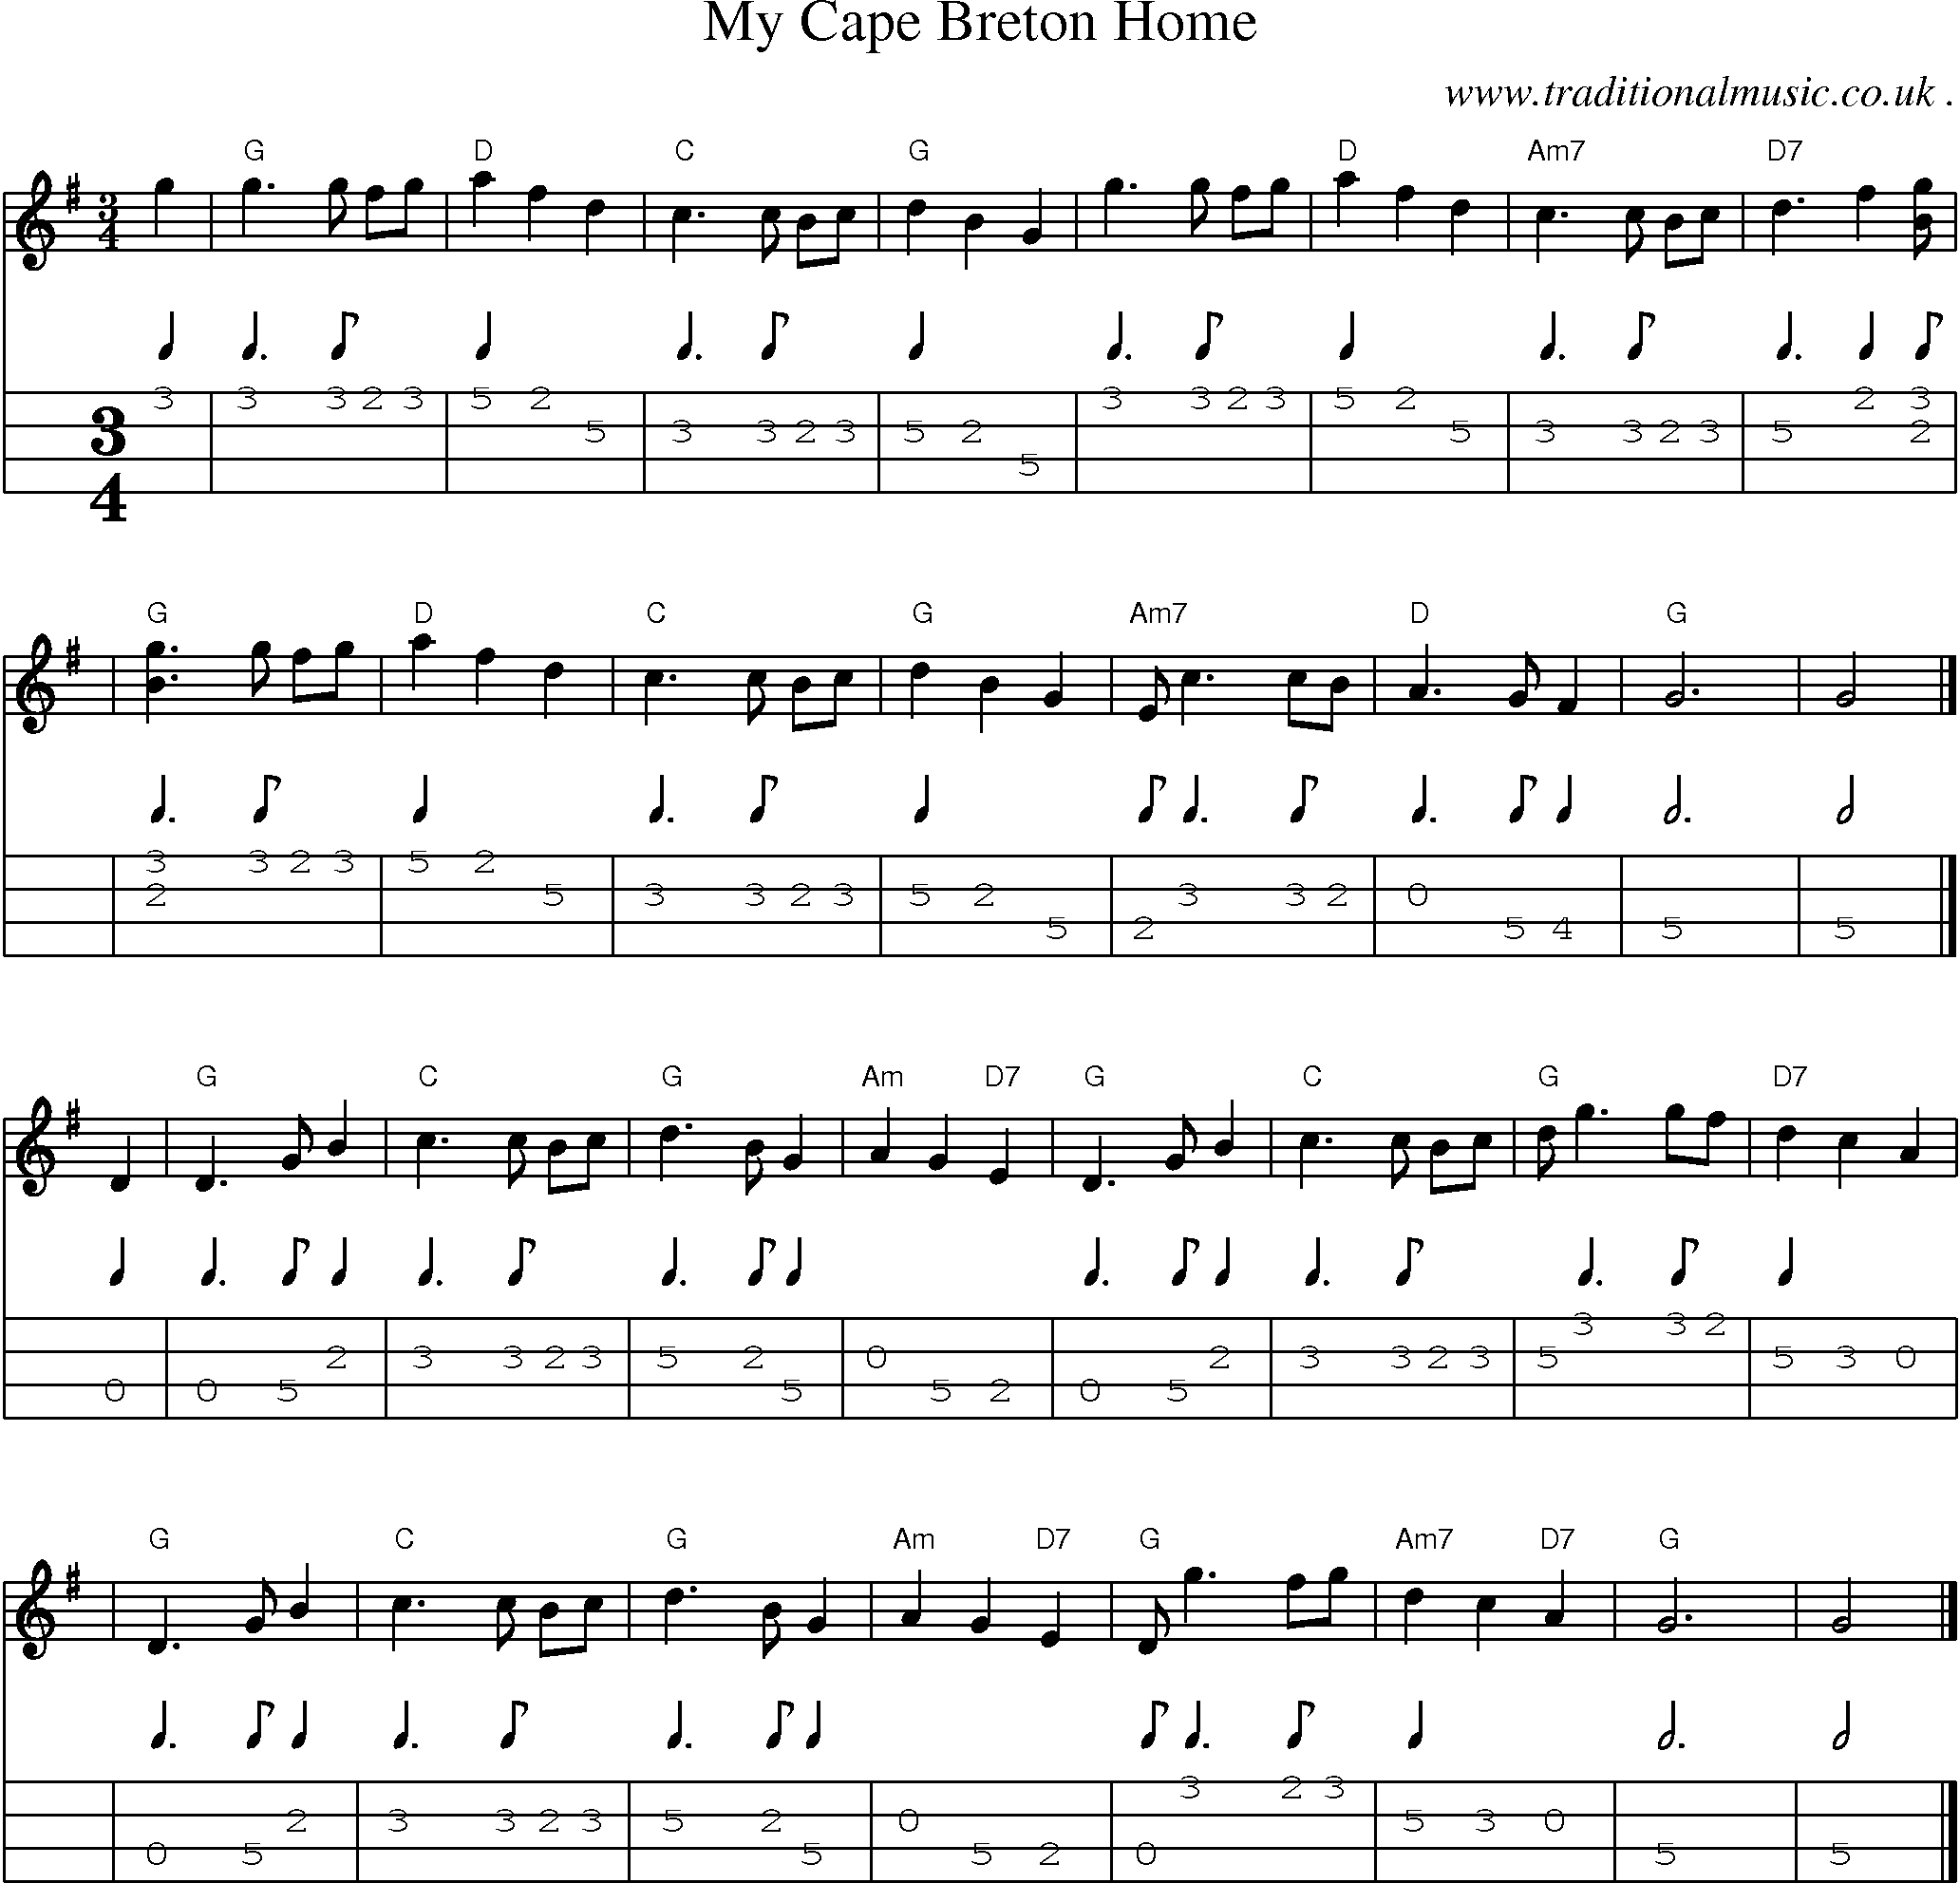 Sheet-music  score, Chords and Mandolin Tabs for My Cape Breton Home